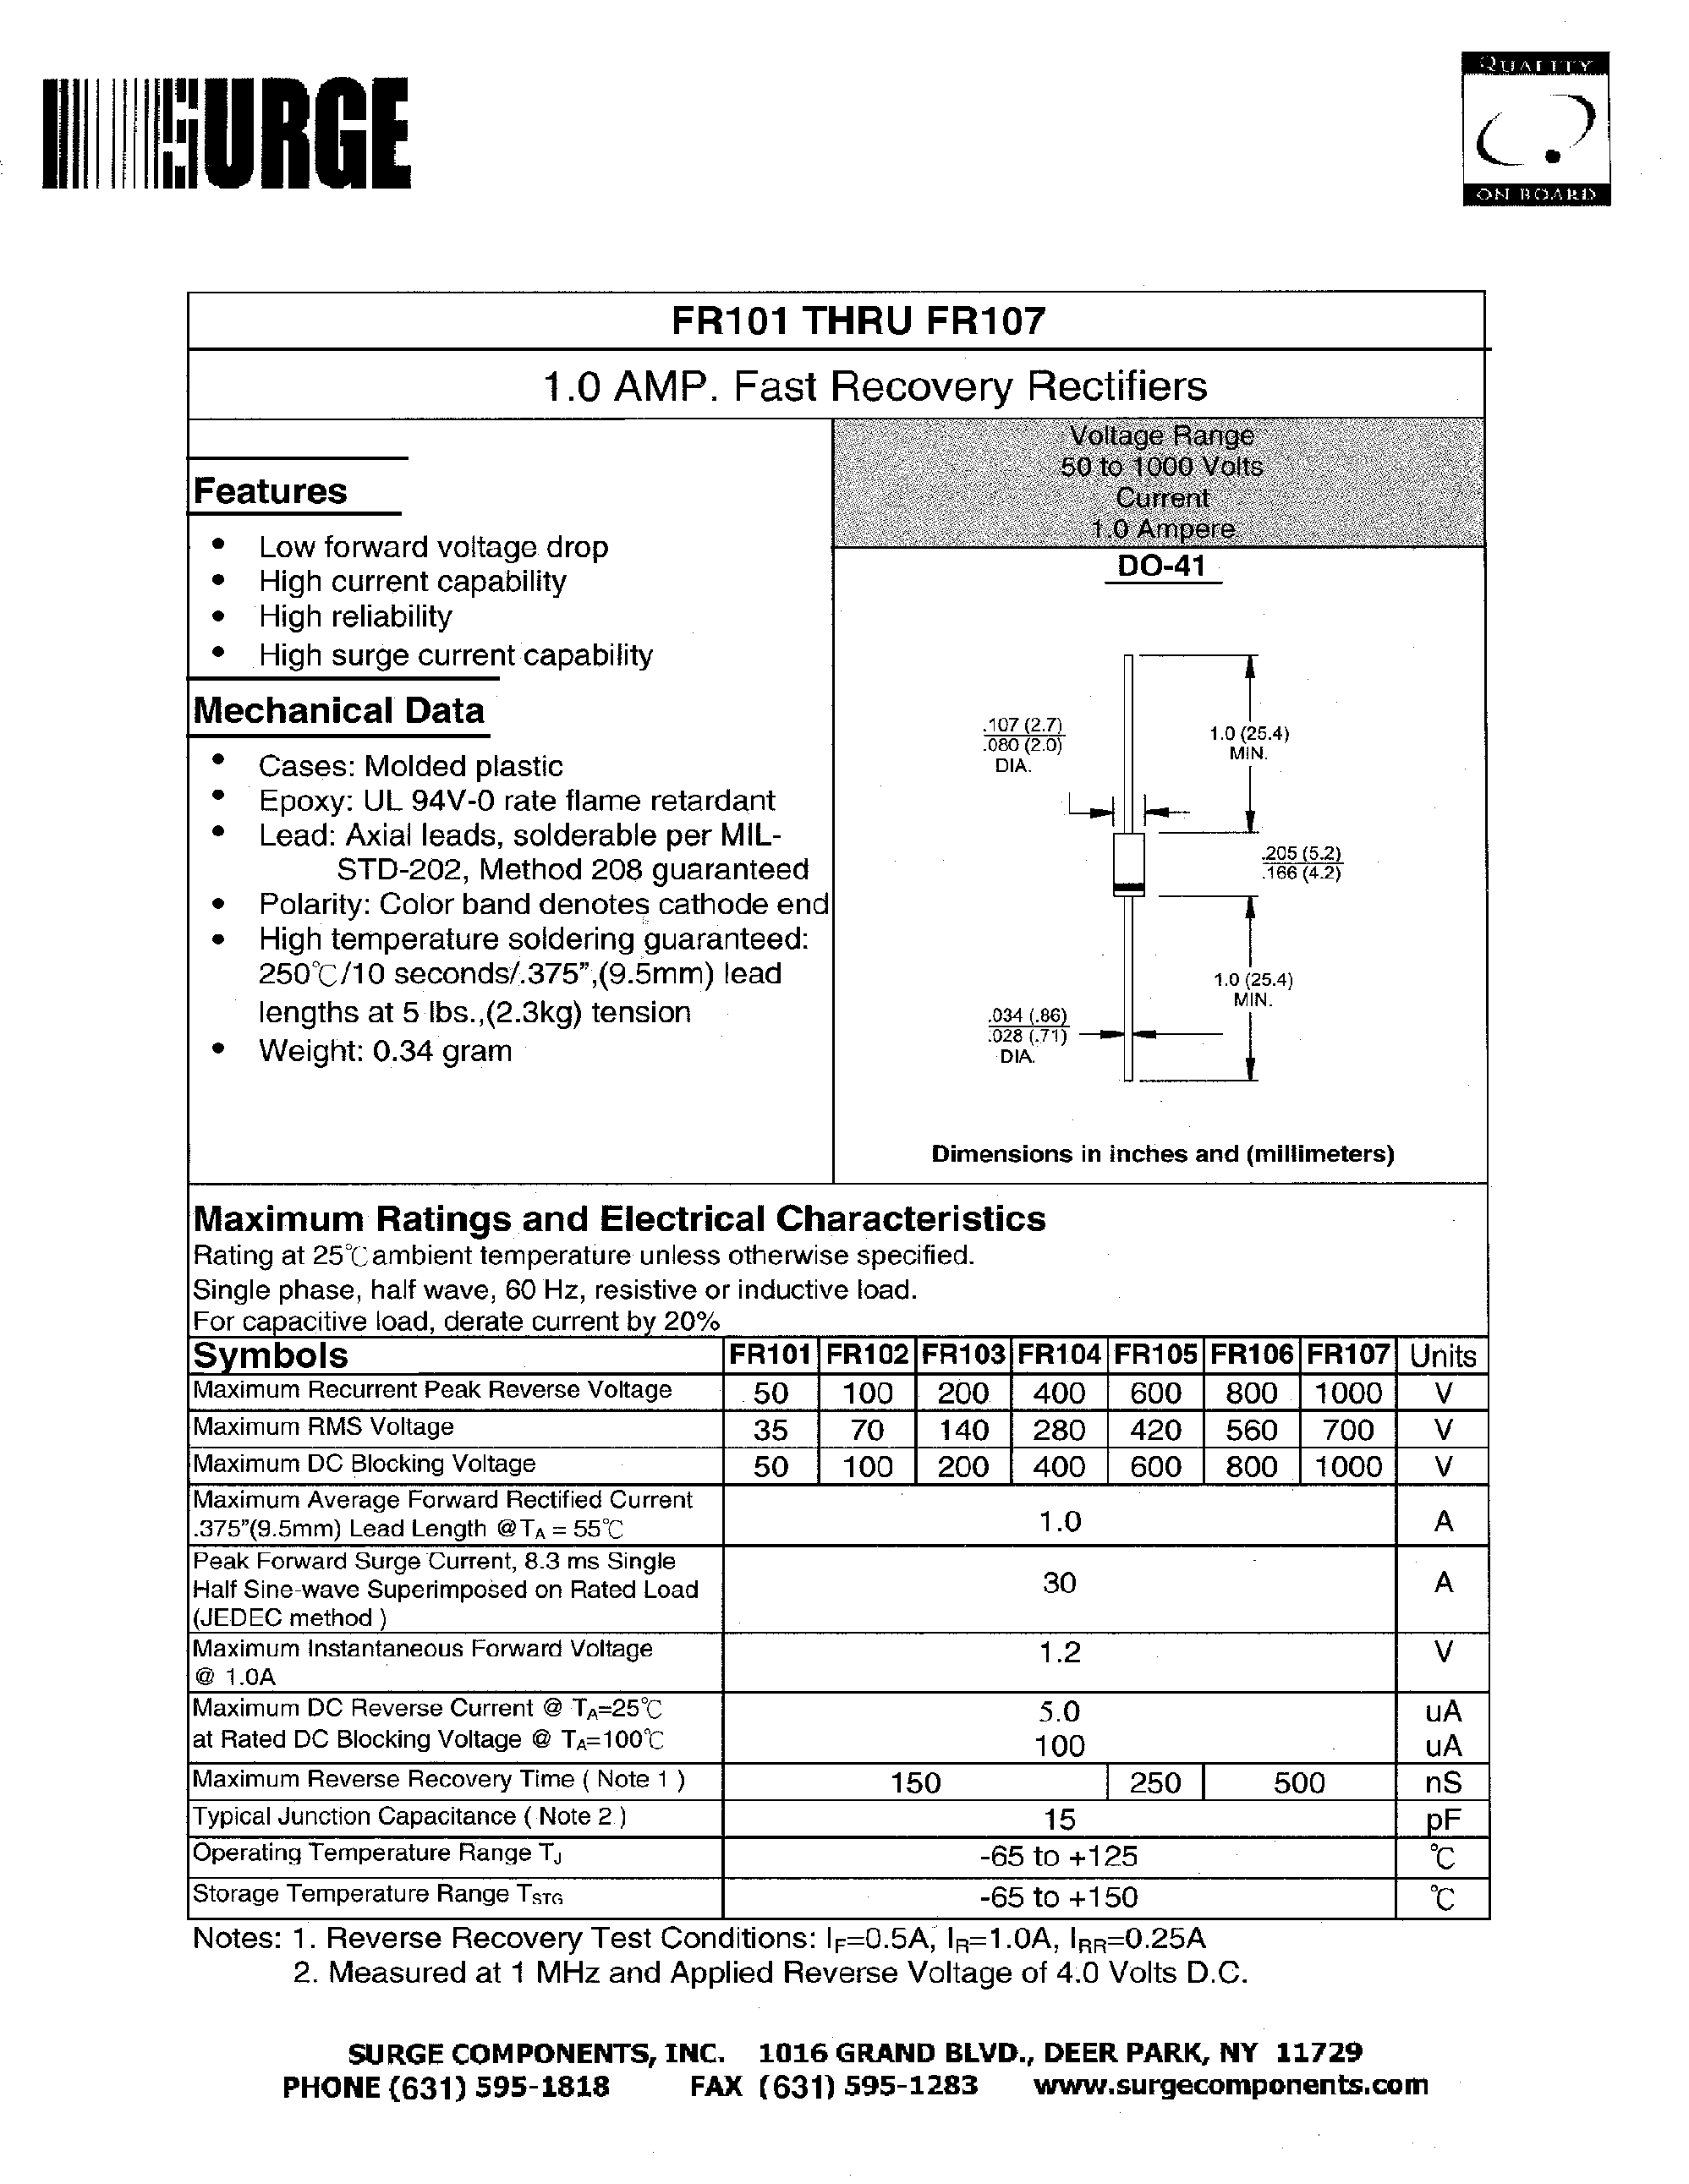 Datasheet FR101 - 1.0 AMP. Fast Recovery Rectifiers page 1